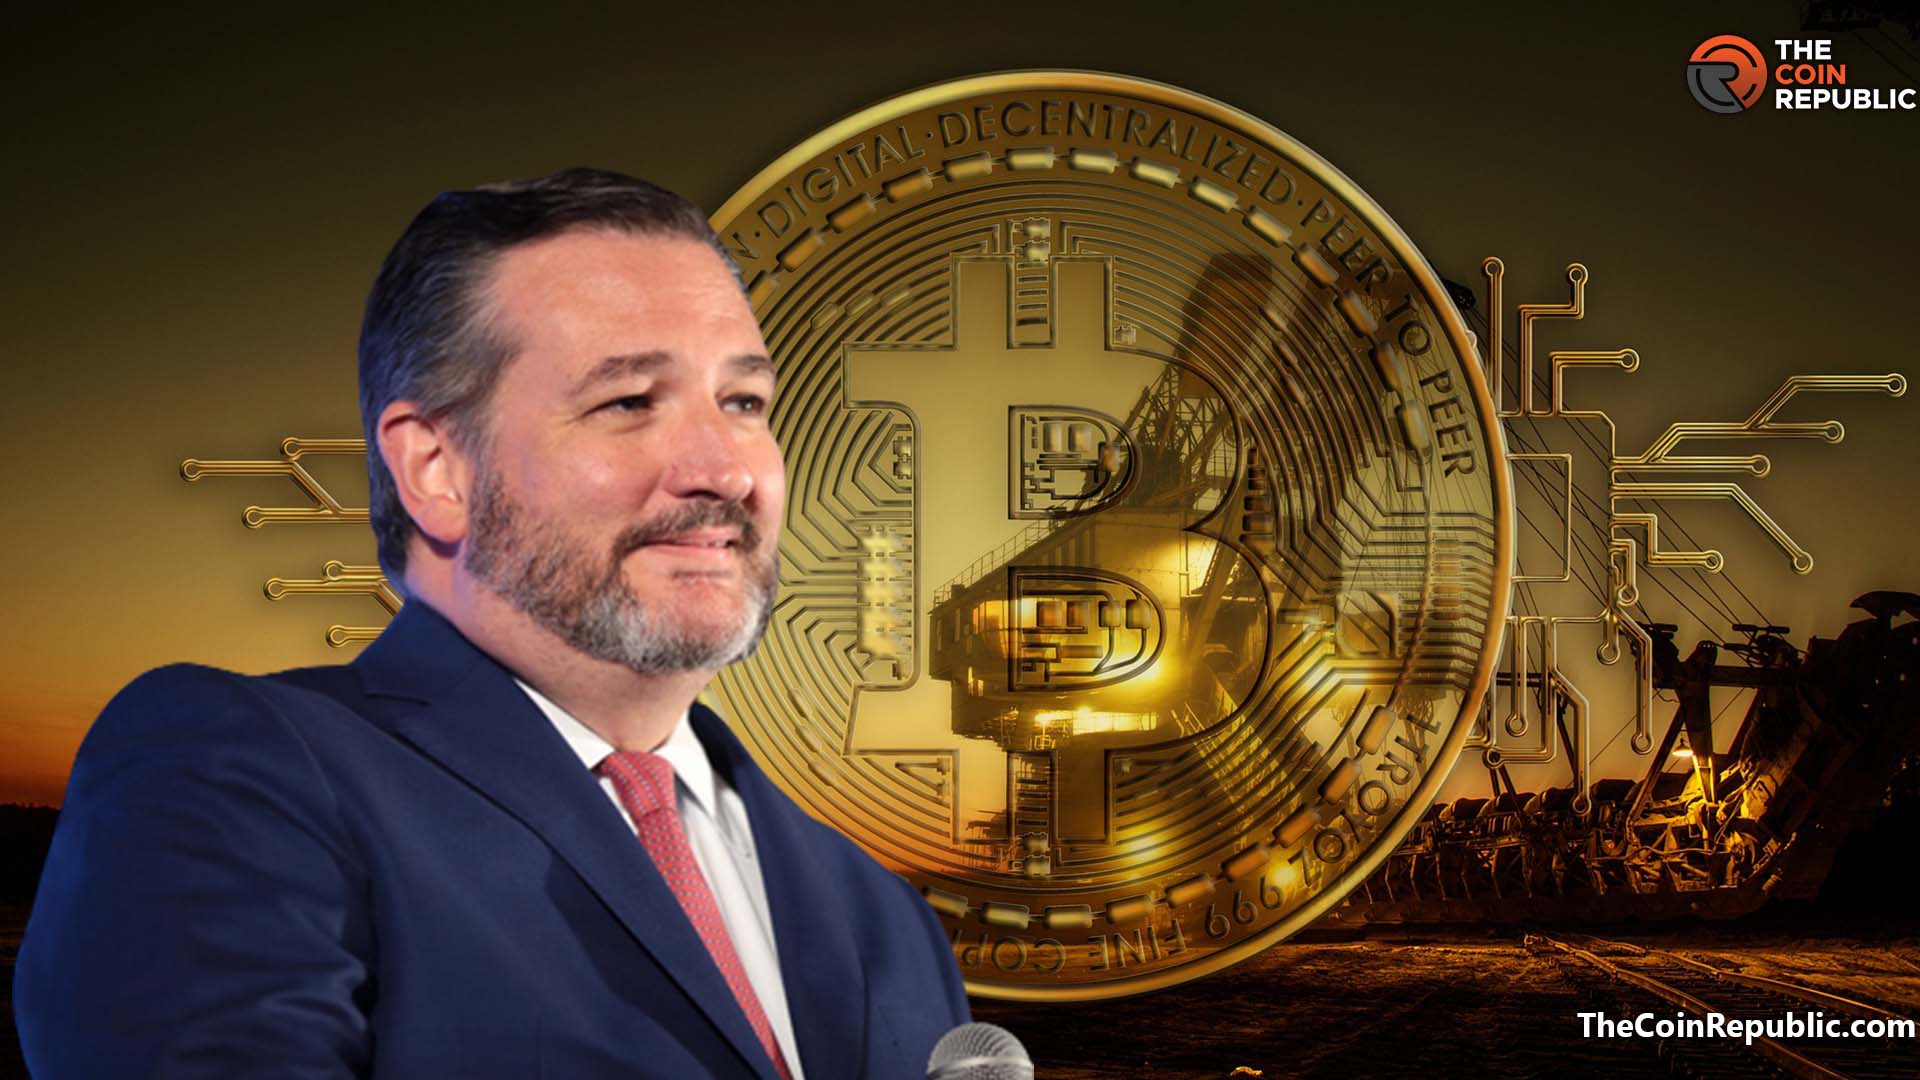 Texas is The Perfect Location for Bitcoin Mining: Ted Cruz